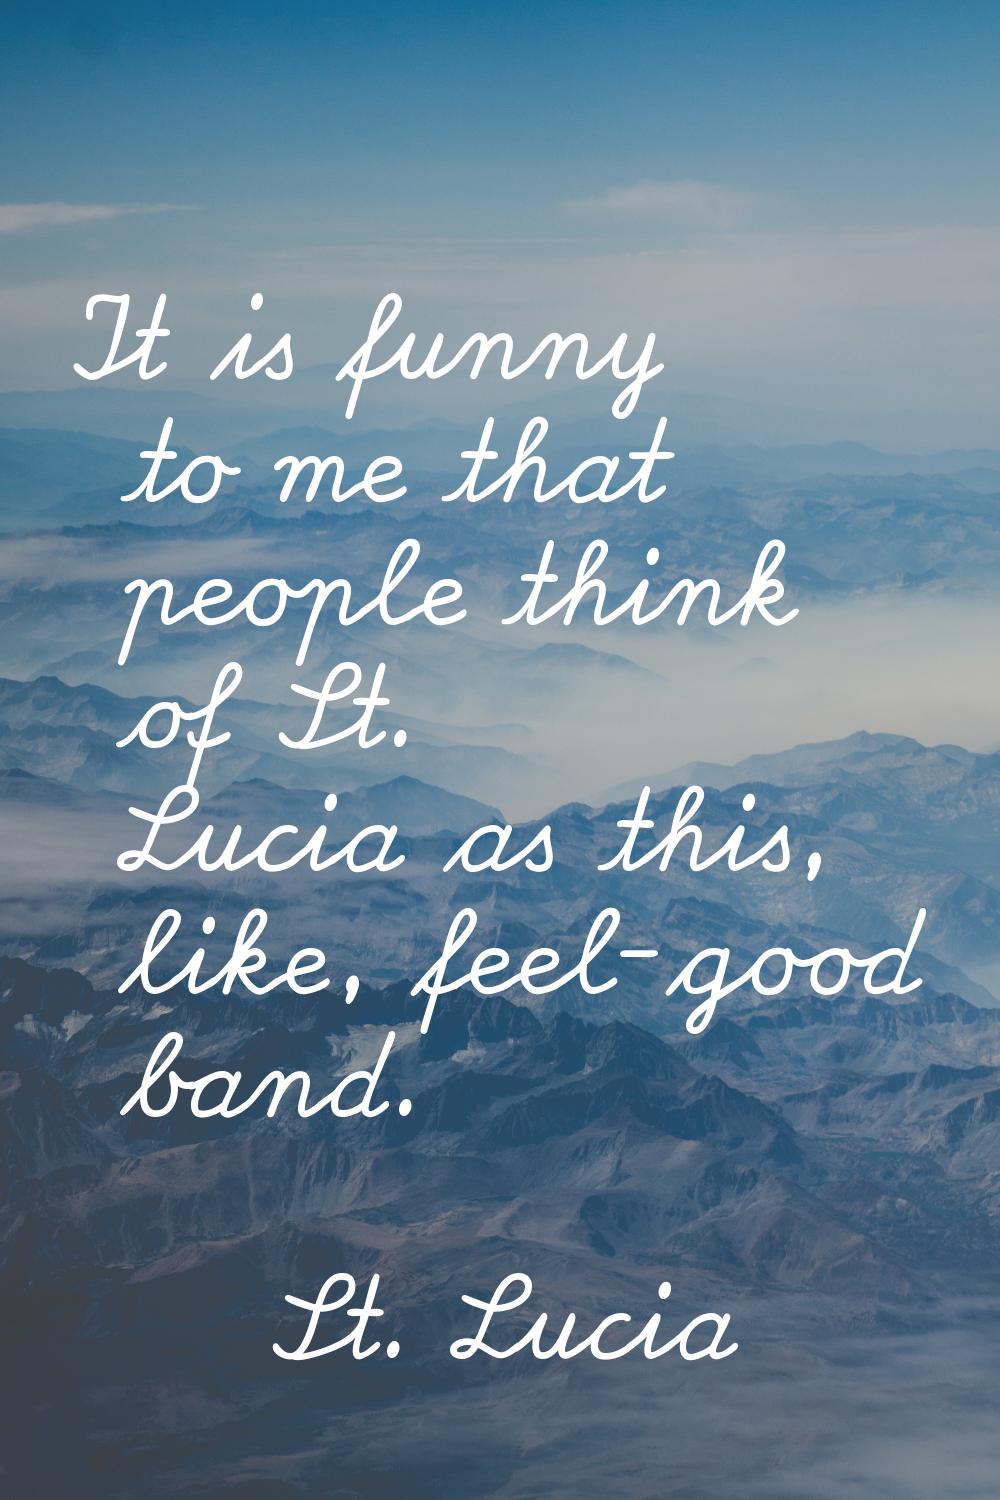 It is funny to me that people think of St. Lucia as this, like, feel-good band.